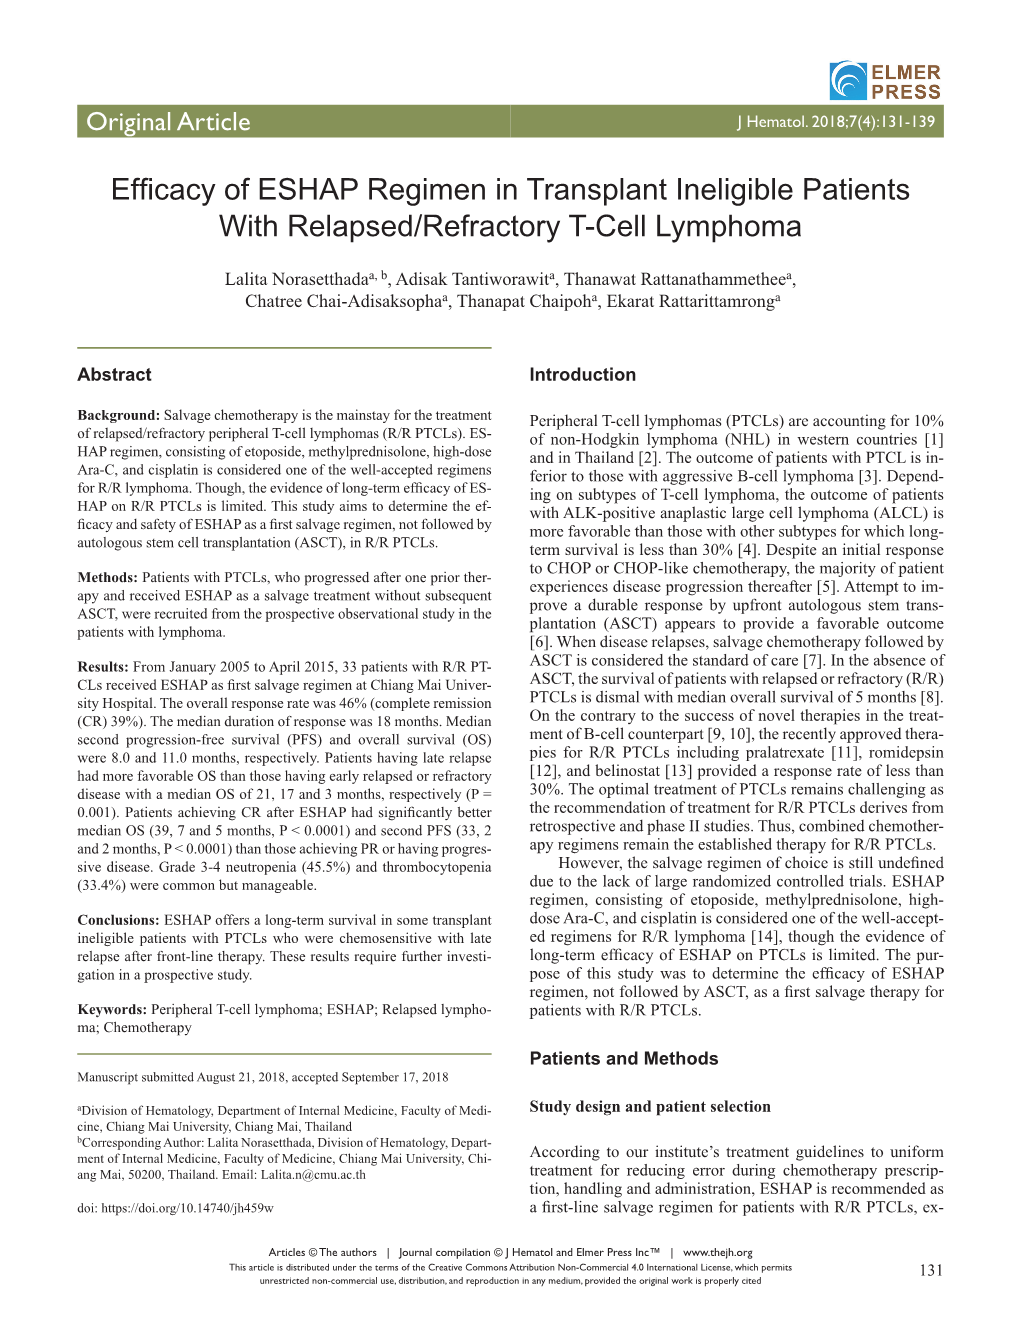 Efficacy of ESHAP Regimen in Transplant Ineligible Patients with Relapsed/Refractory T-Cell Lymphoma